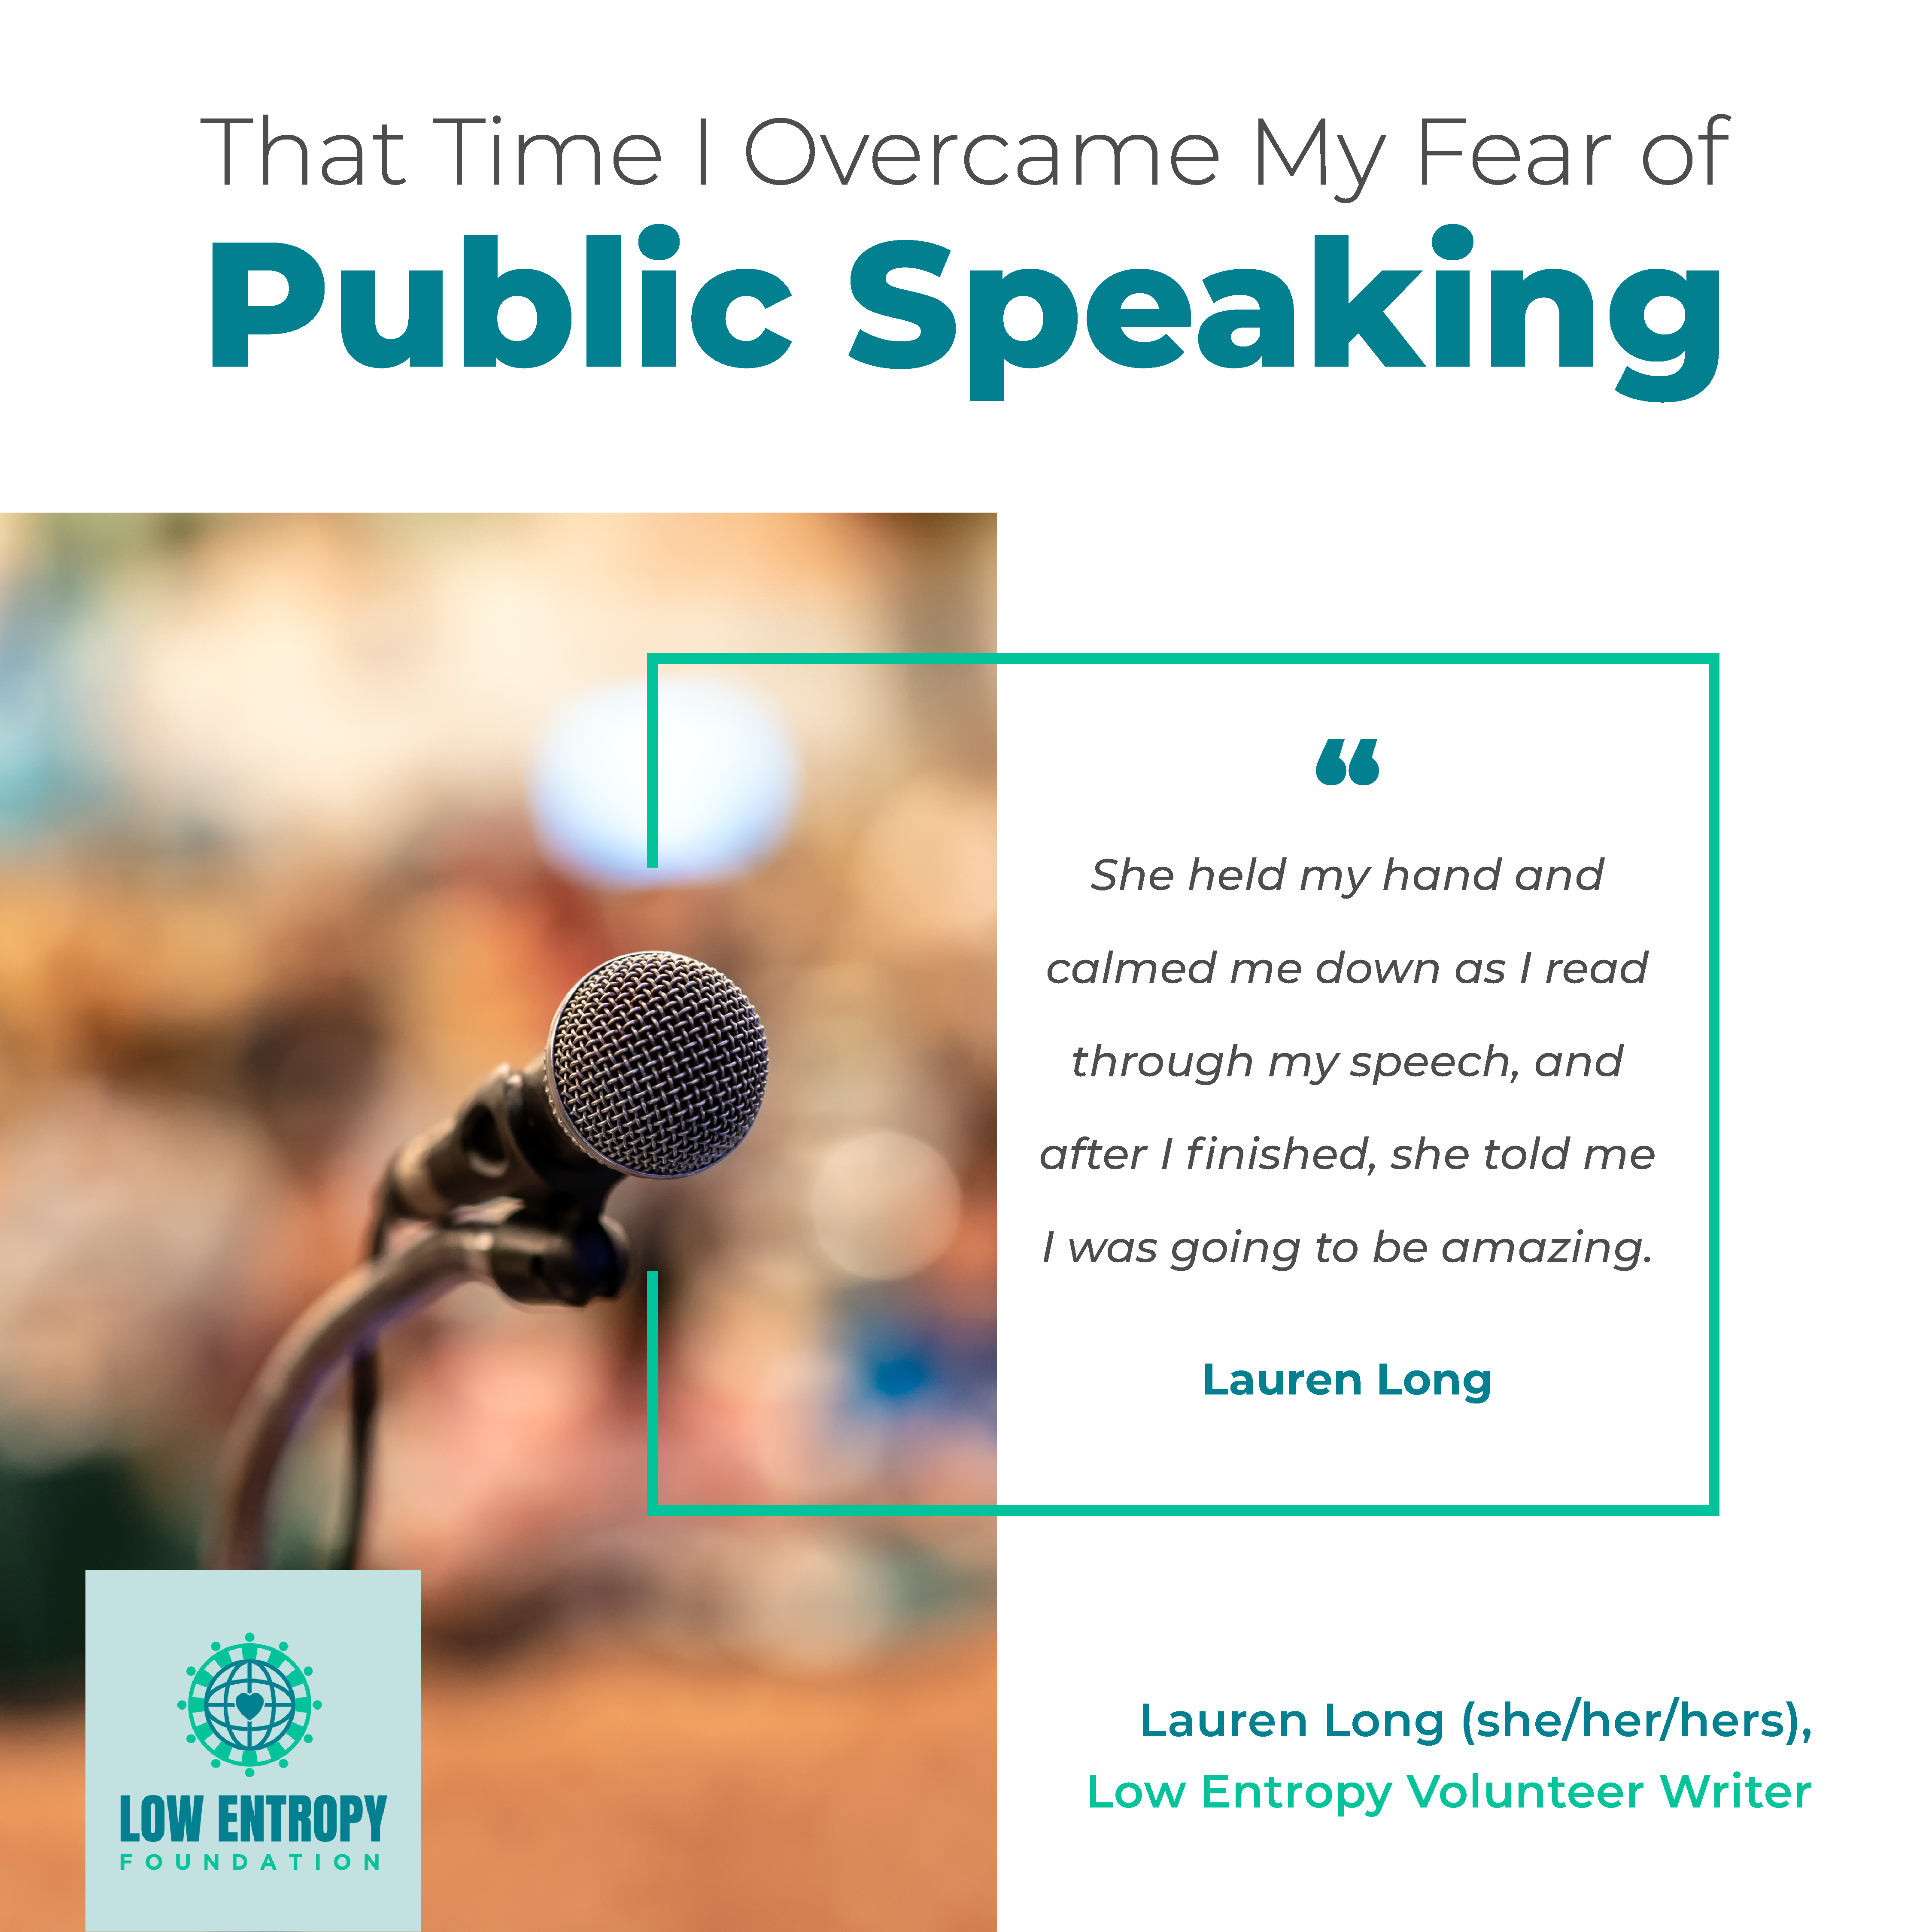 That Time I Overcame My Fear of Public Speaking